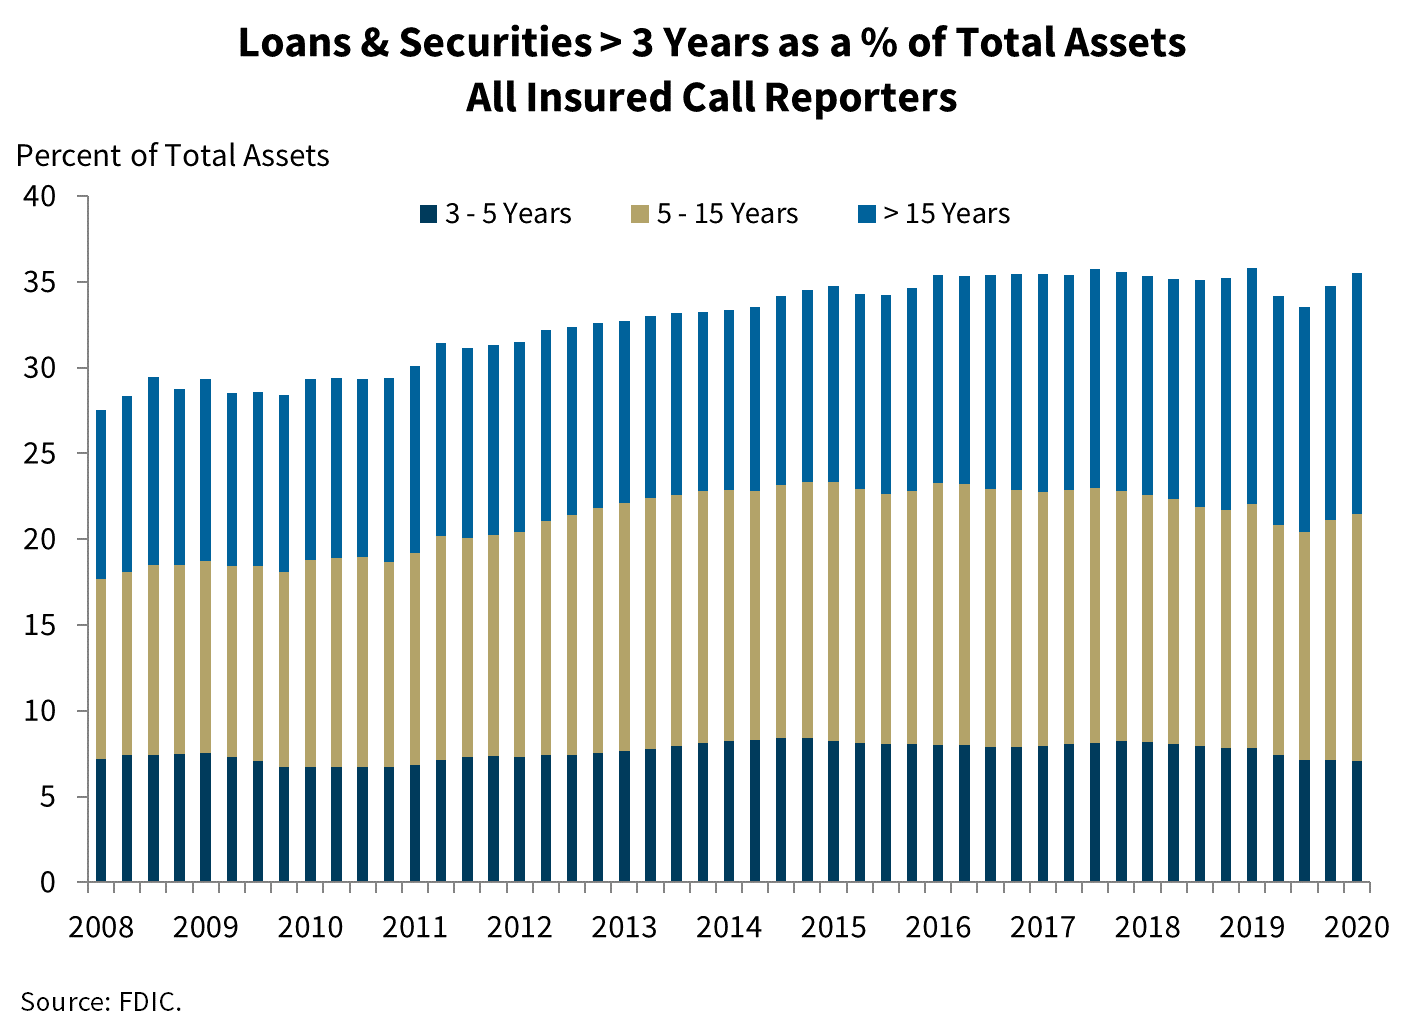 Chart 5: Loans and Securities > 3 years as a % of Total Assets All Insured Call Reporters